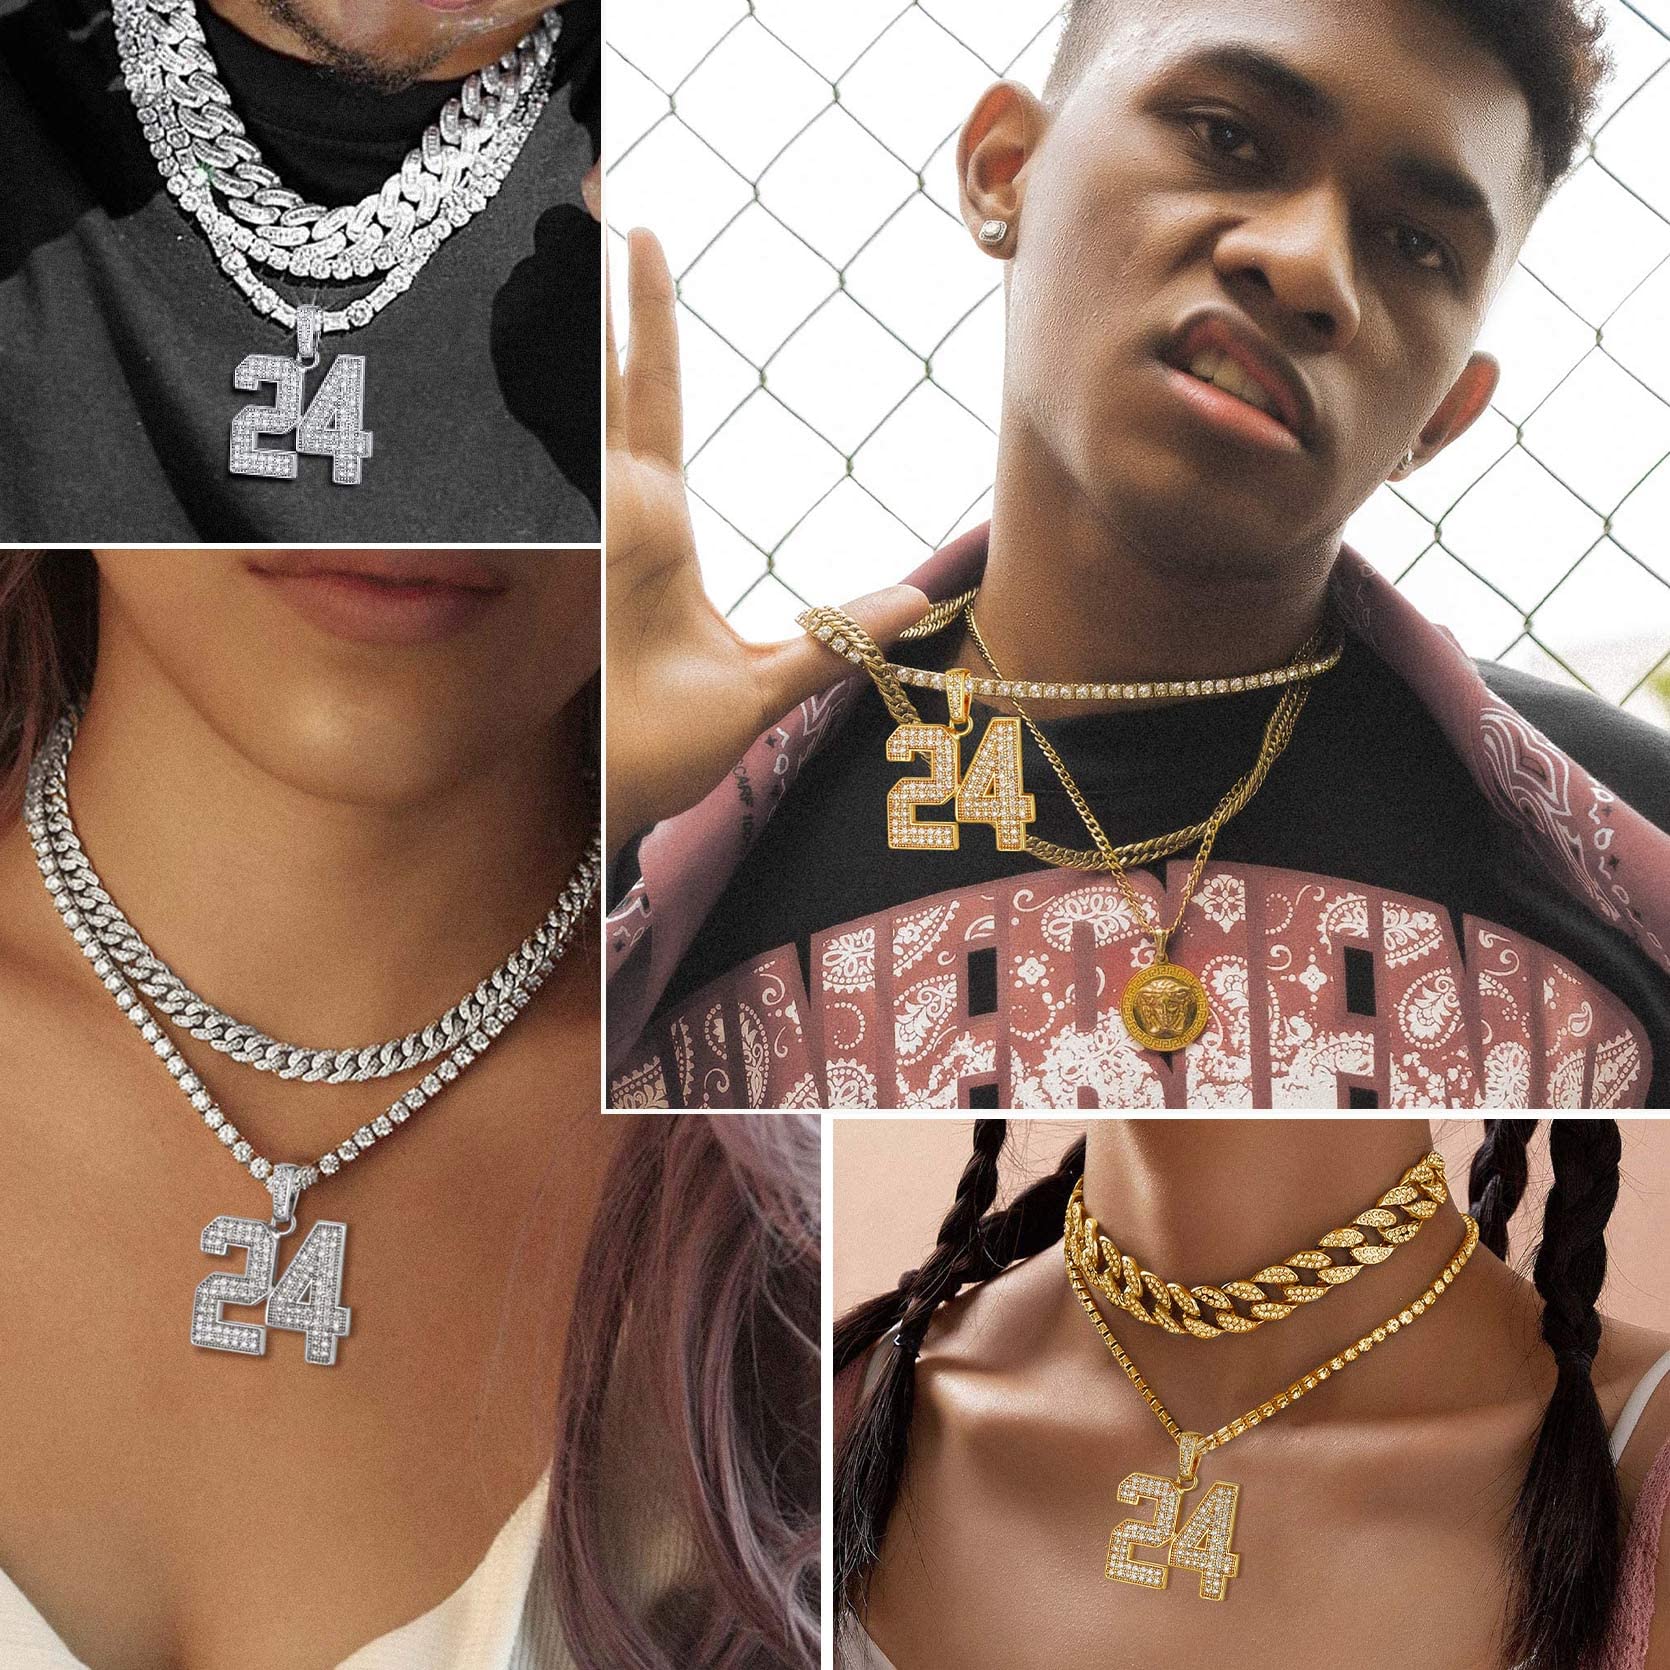 KeyStyle Number Necklaces For Men, Bling Numbers Chain Necklace Hip Hop Simulated Diamond Pendant with Tennis Chain Spiga Chains